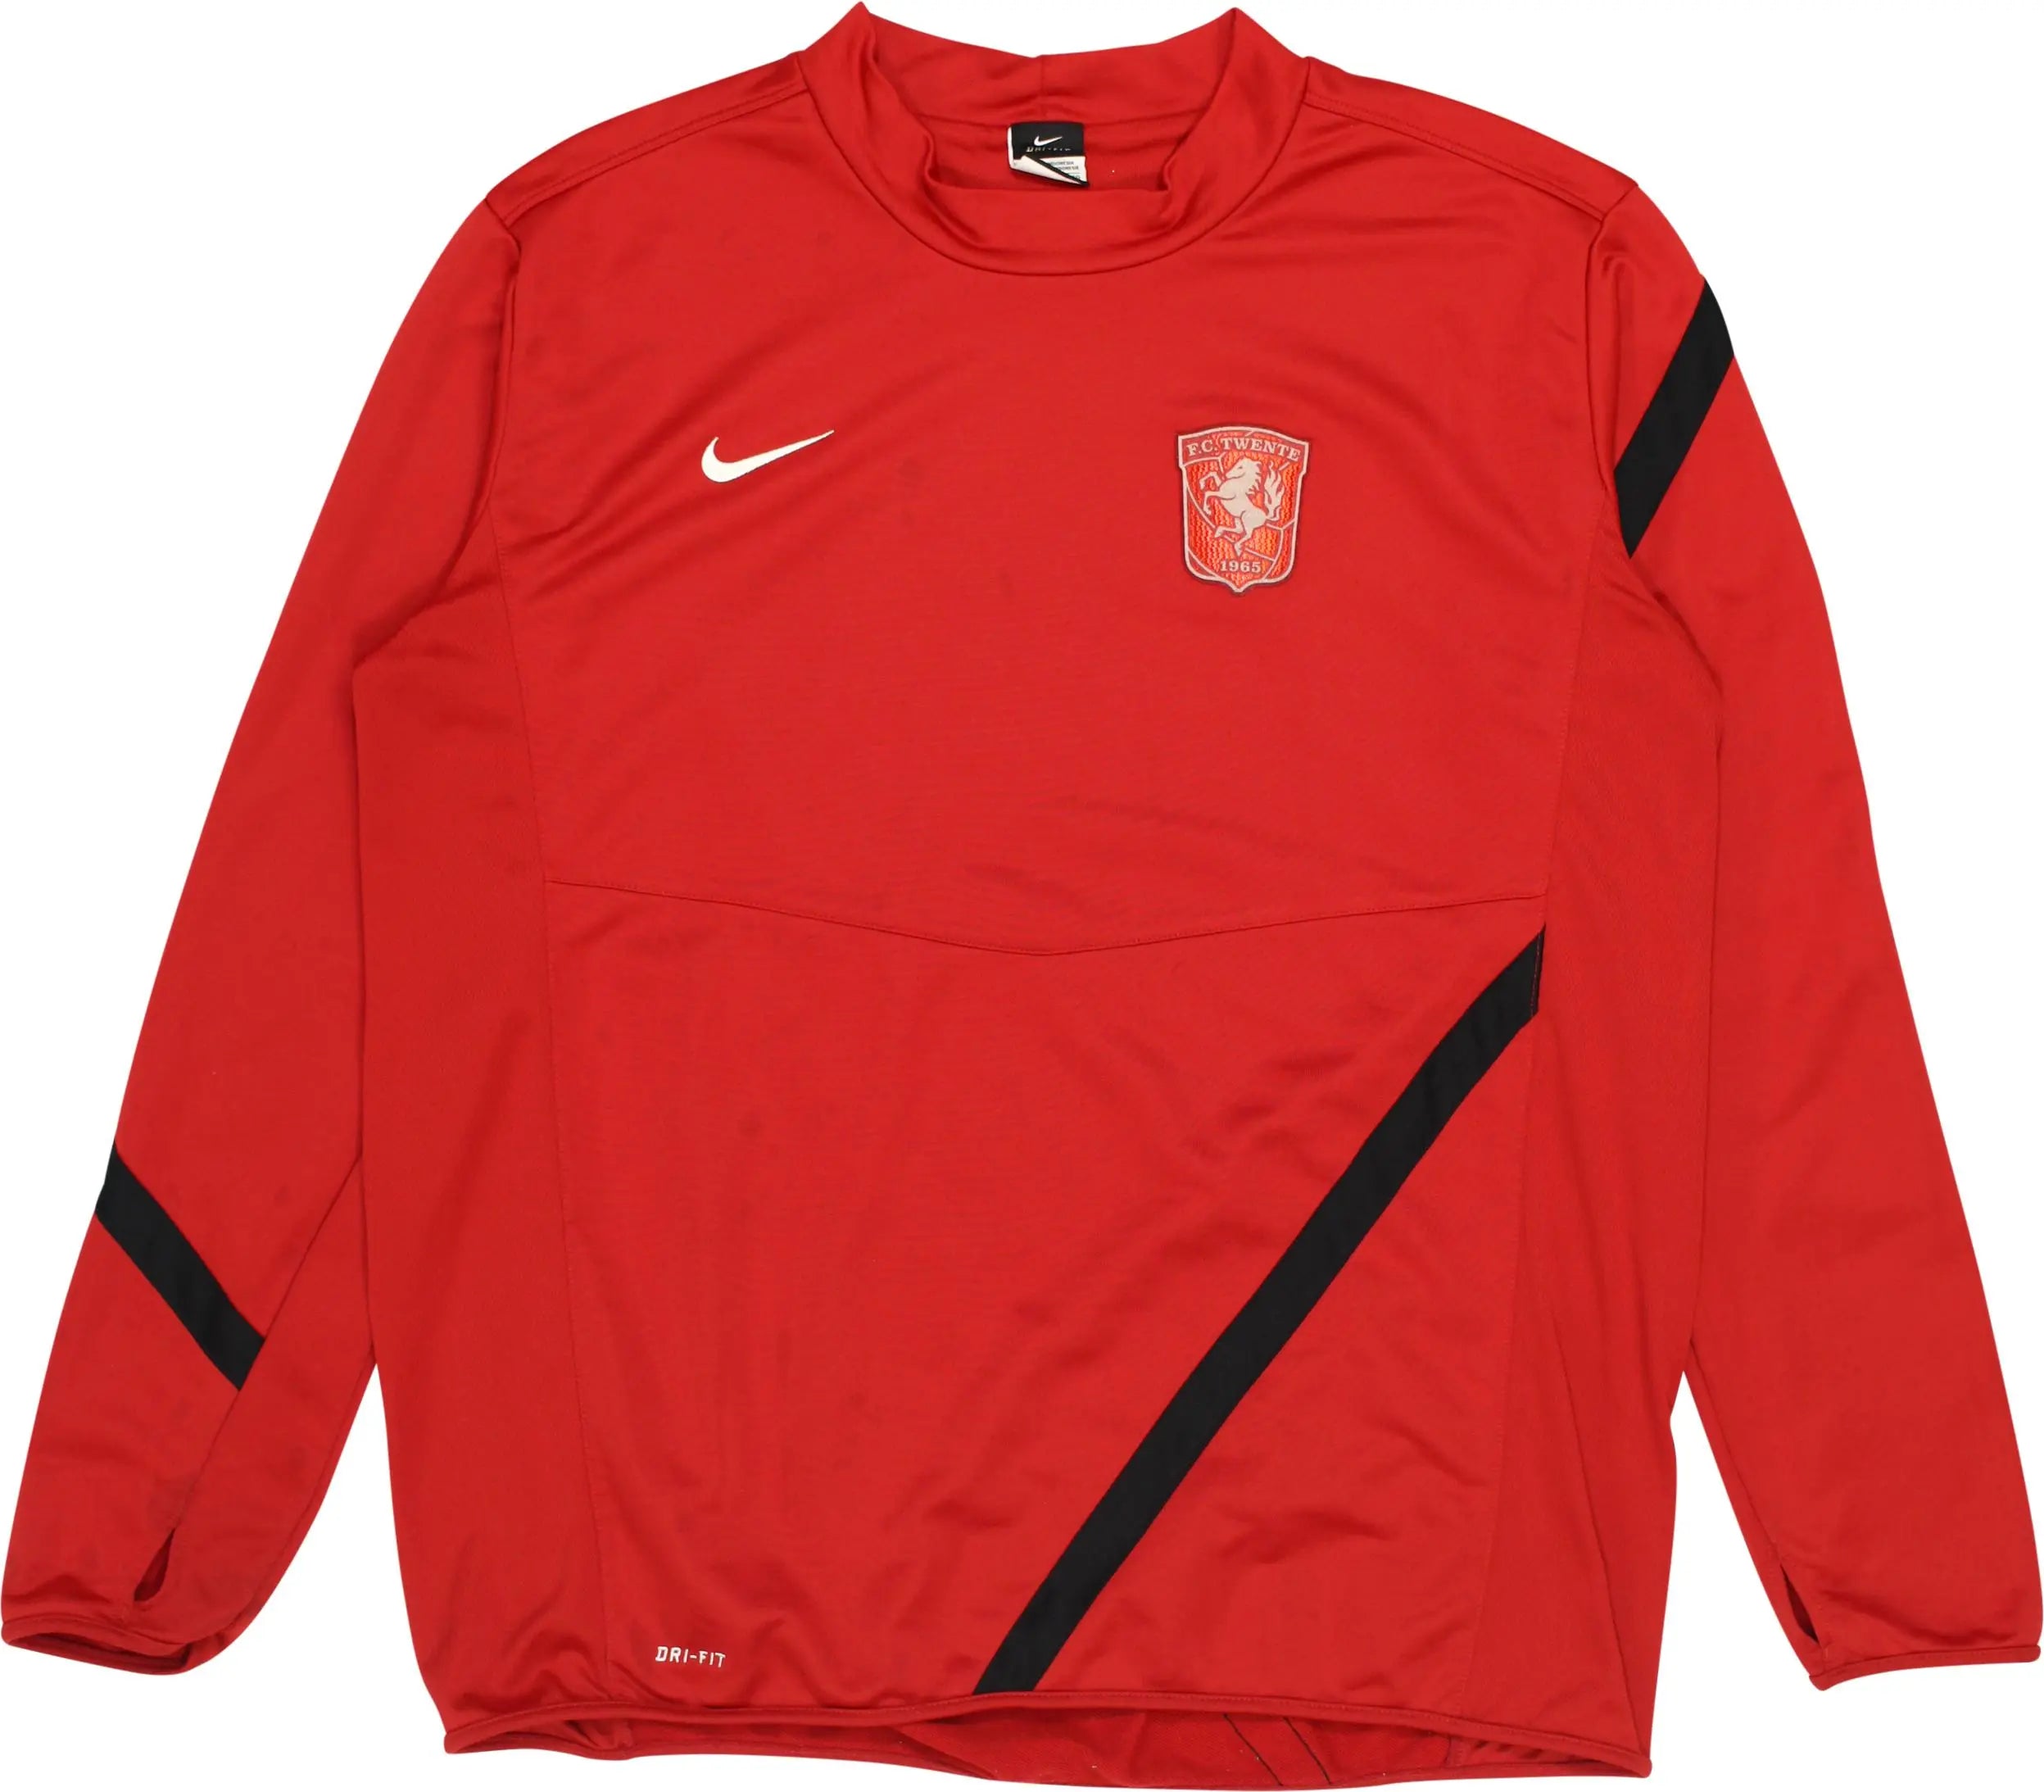 Nike - FC Twente Dri-Fit Long Sleeve Top by Nike- ThriftTale.com - Vintage and second handclothing